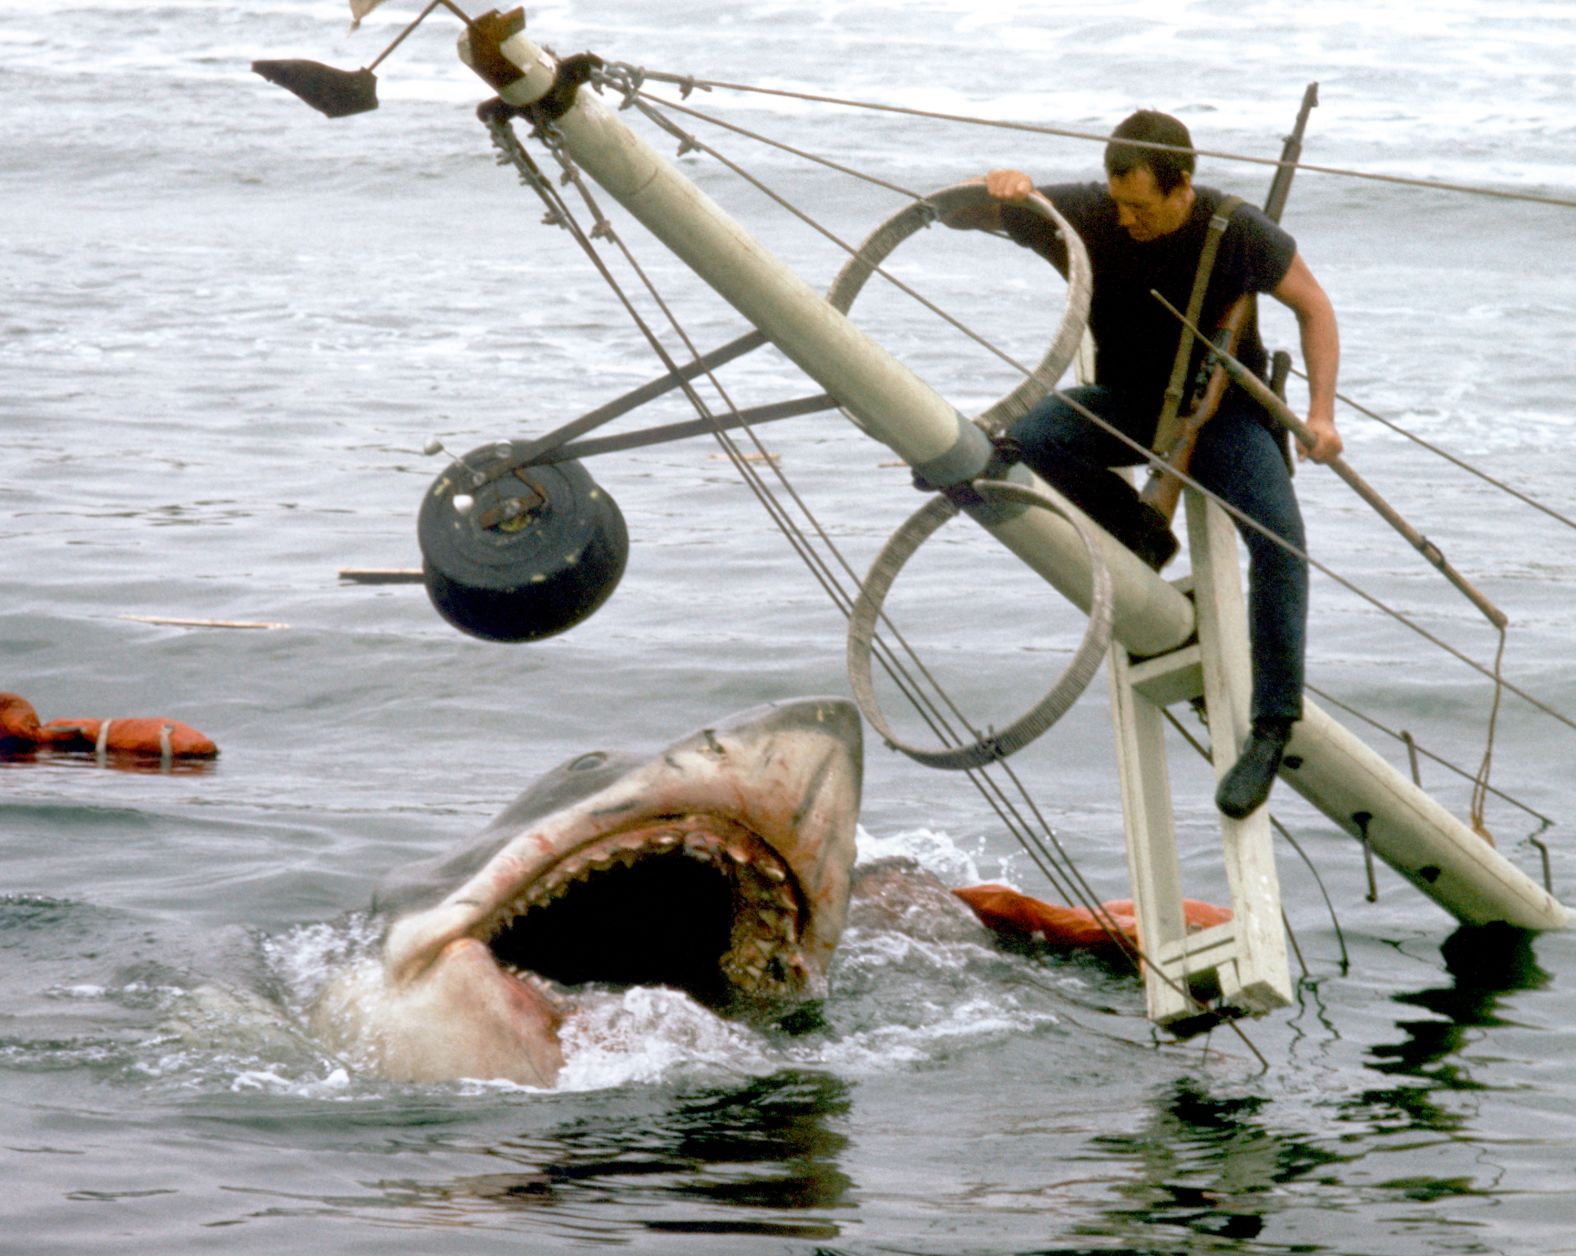 American actor Roy Scheider on the set of Jaws, directed by Steven Spielberg.